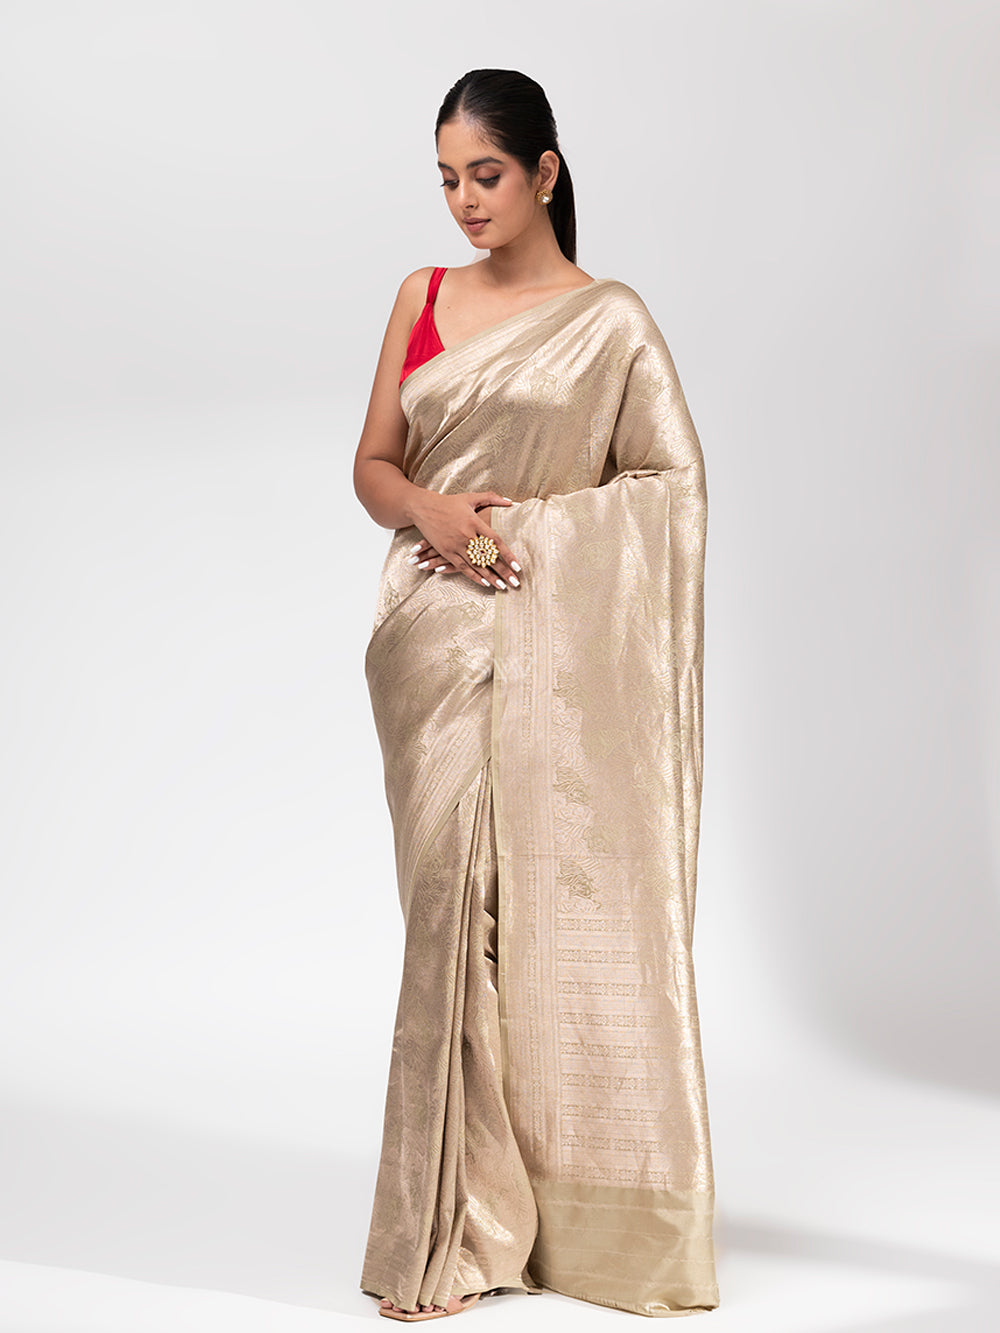 AMMK: Adi Mohini Mohan Kanjilal - :: New Collection :: Exclusive 10% - 15%  flat discount on purchase above Rs.2000/- only from #AMMK. Shop now Zardosi  Banarasi #Silk #sarees: https://bit.ly/2HqcbmR #ethnicwear #fashion #